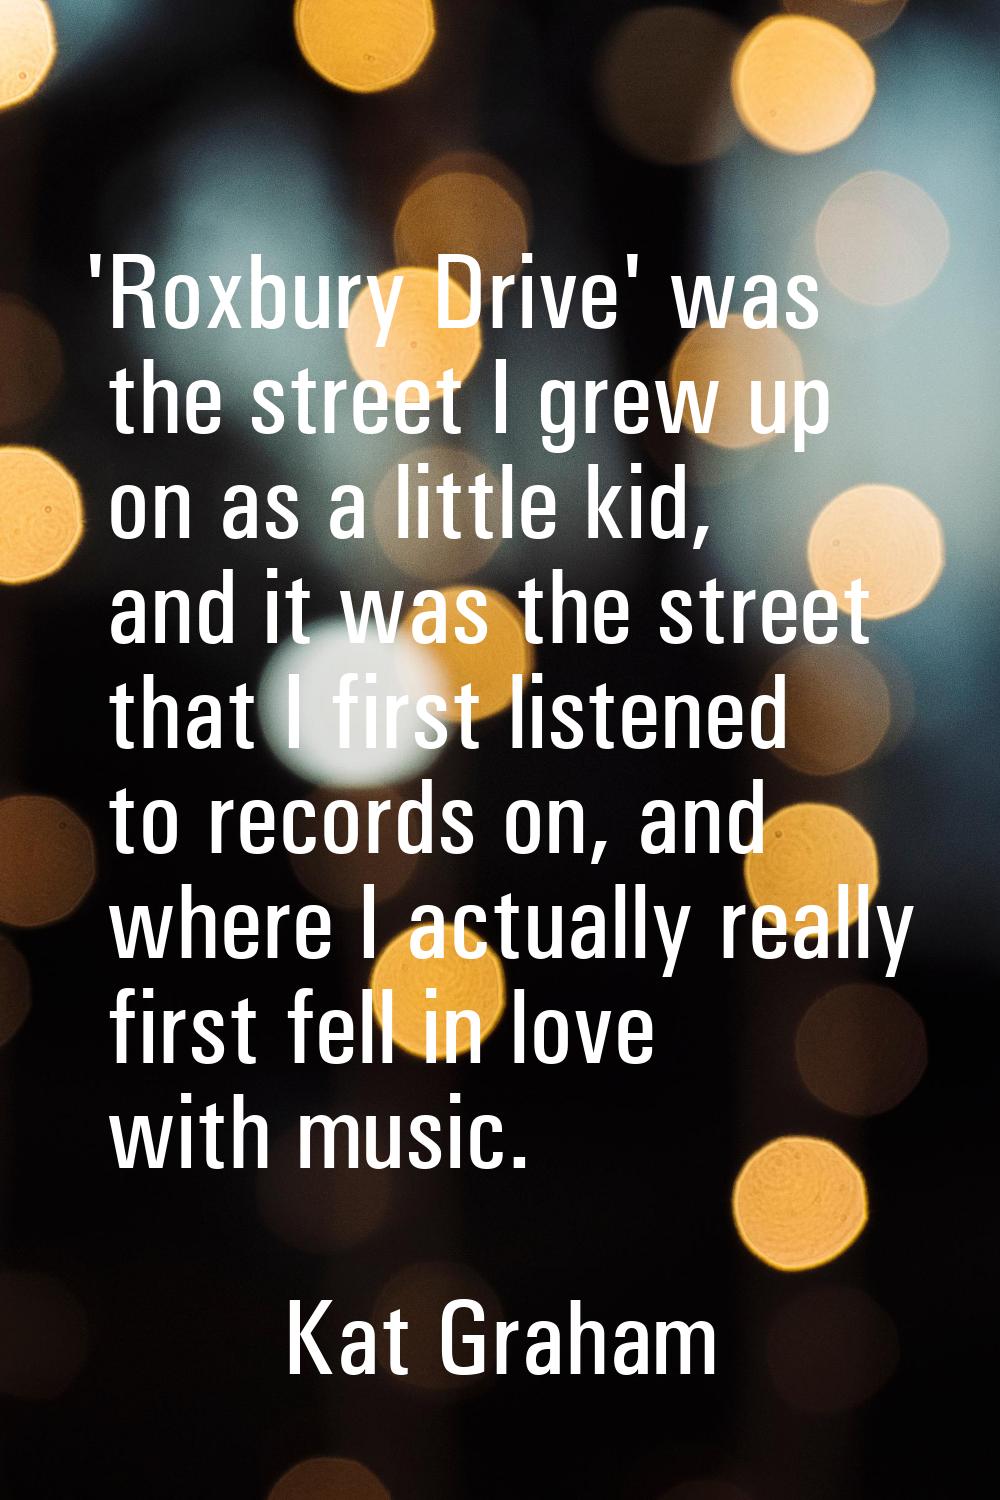 'Roxbury Drive' was the street I grew up on as a little kid, and it was the street that I first lis